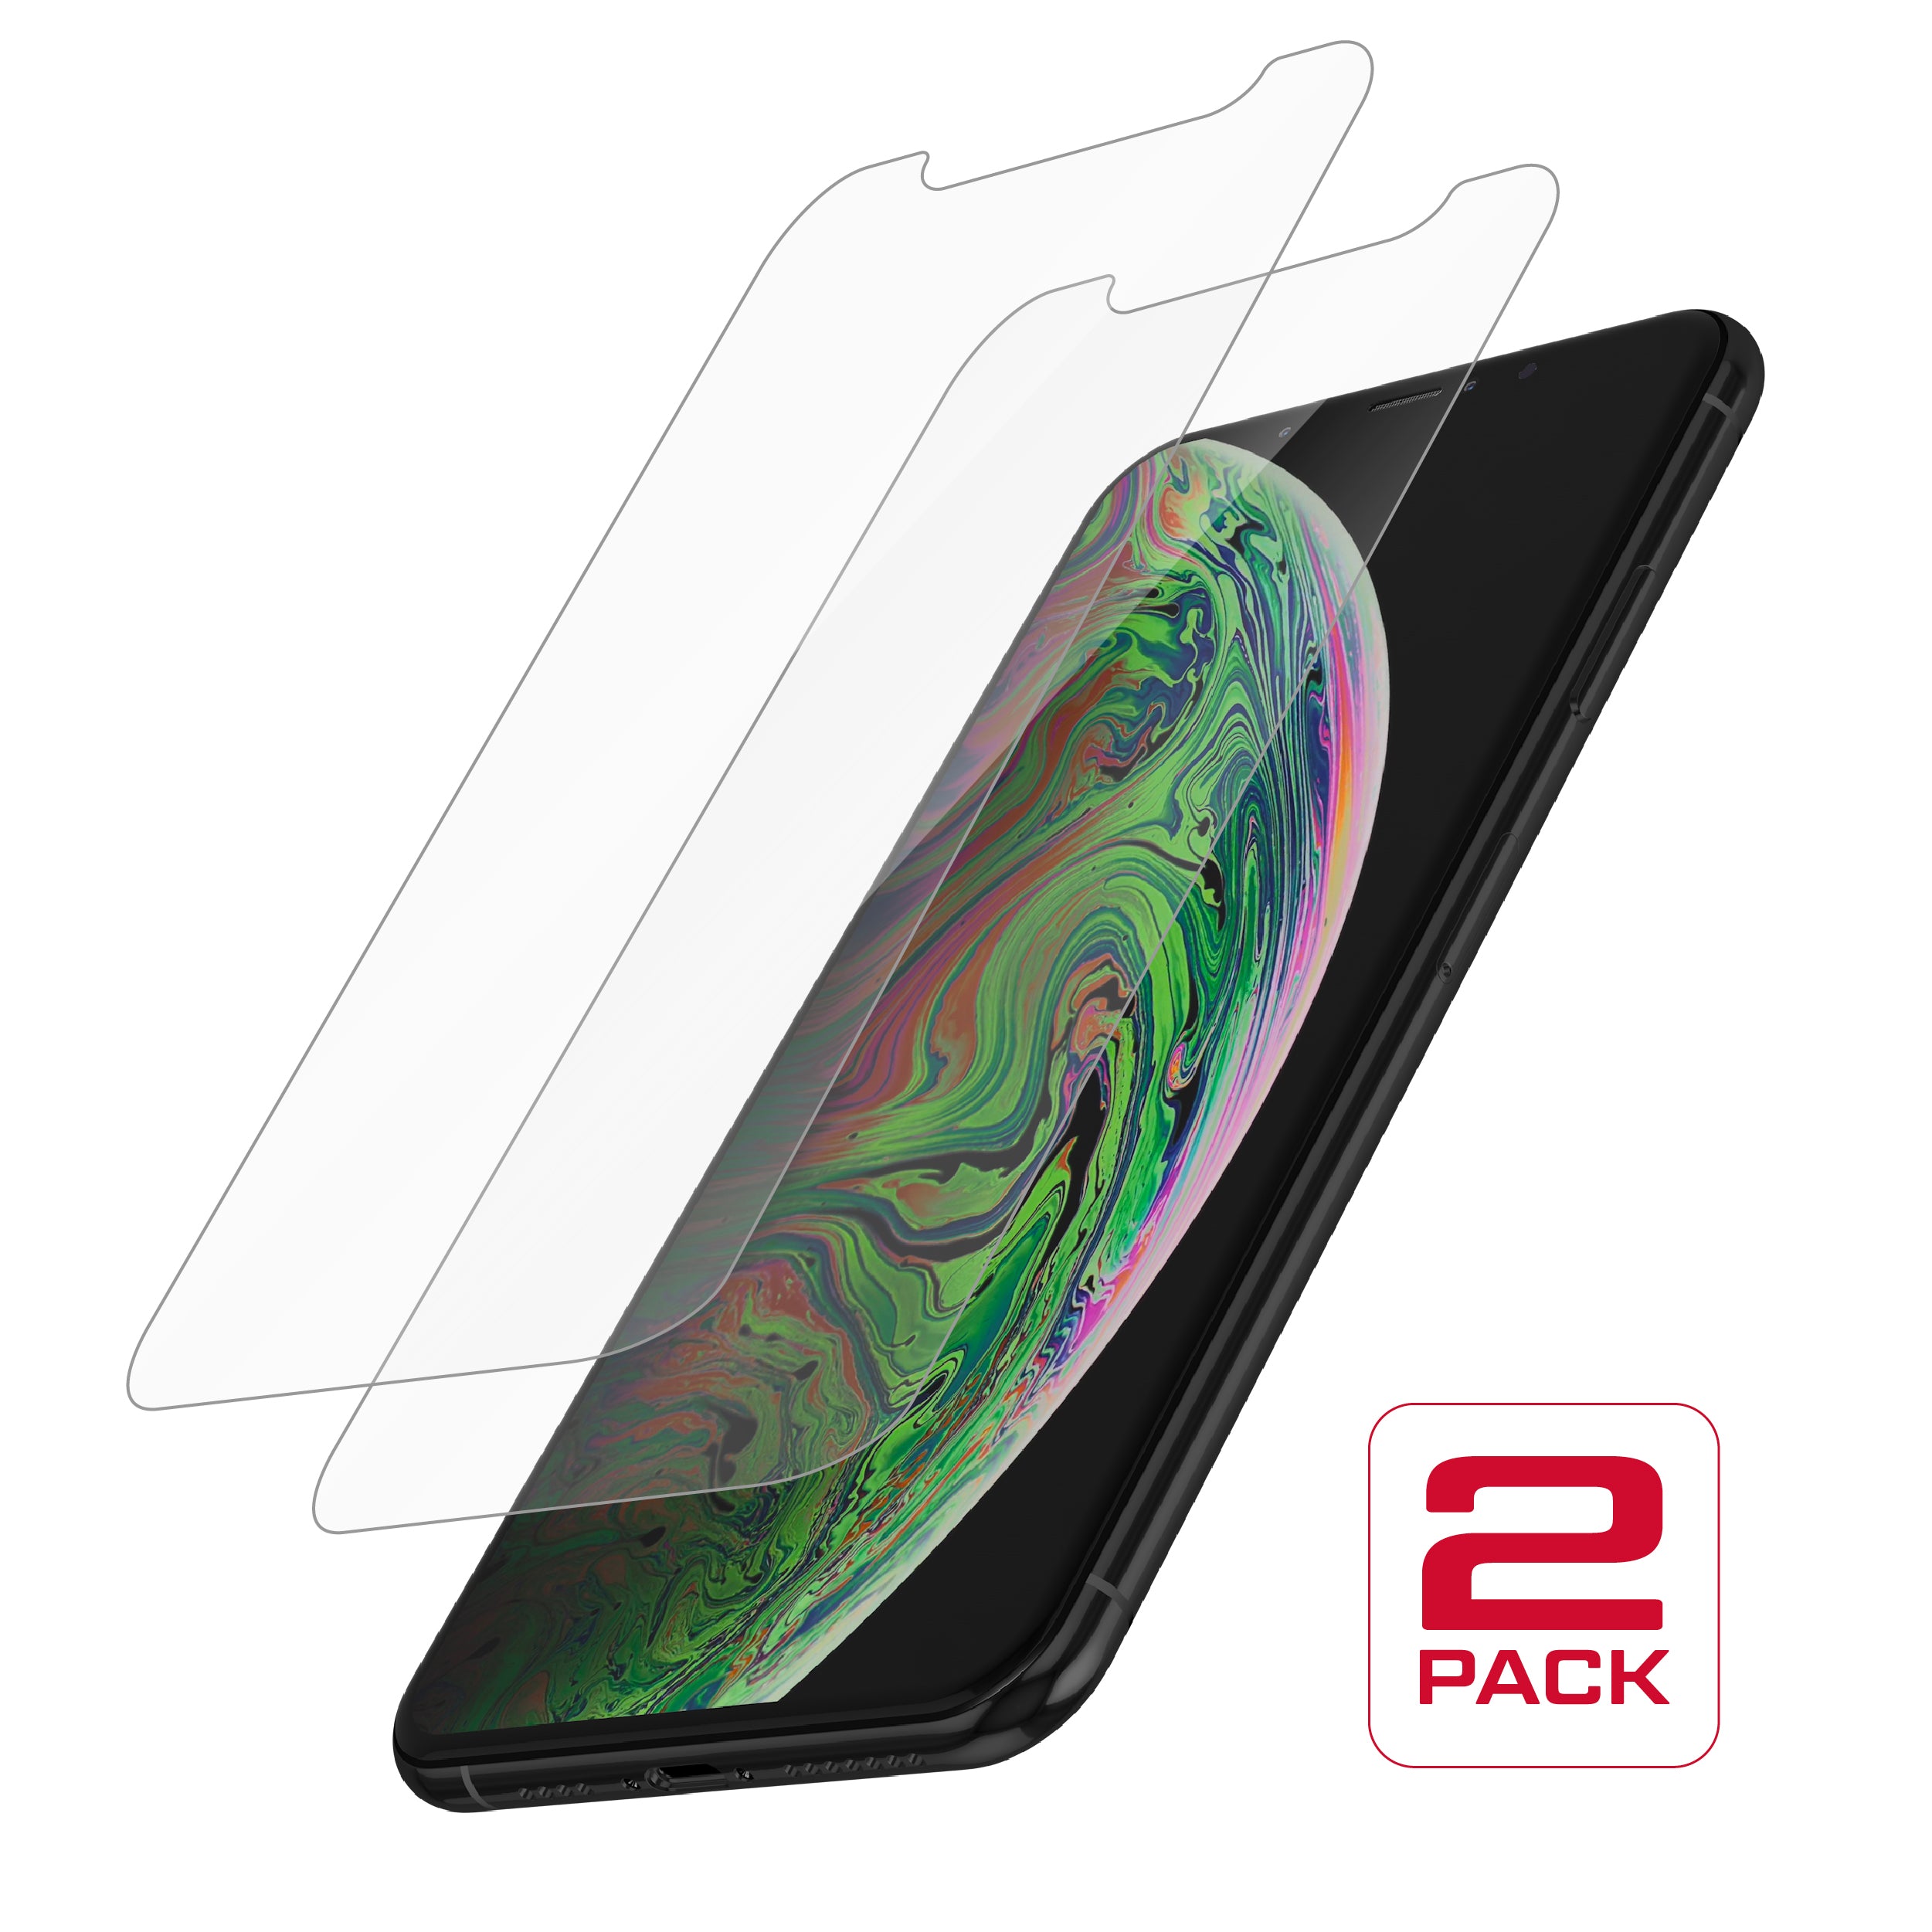 Protective Glass for iPhone XS Max<br>Dual Pack